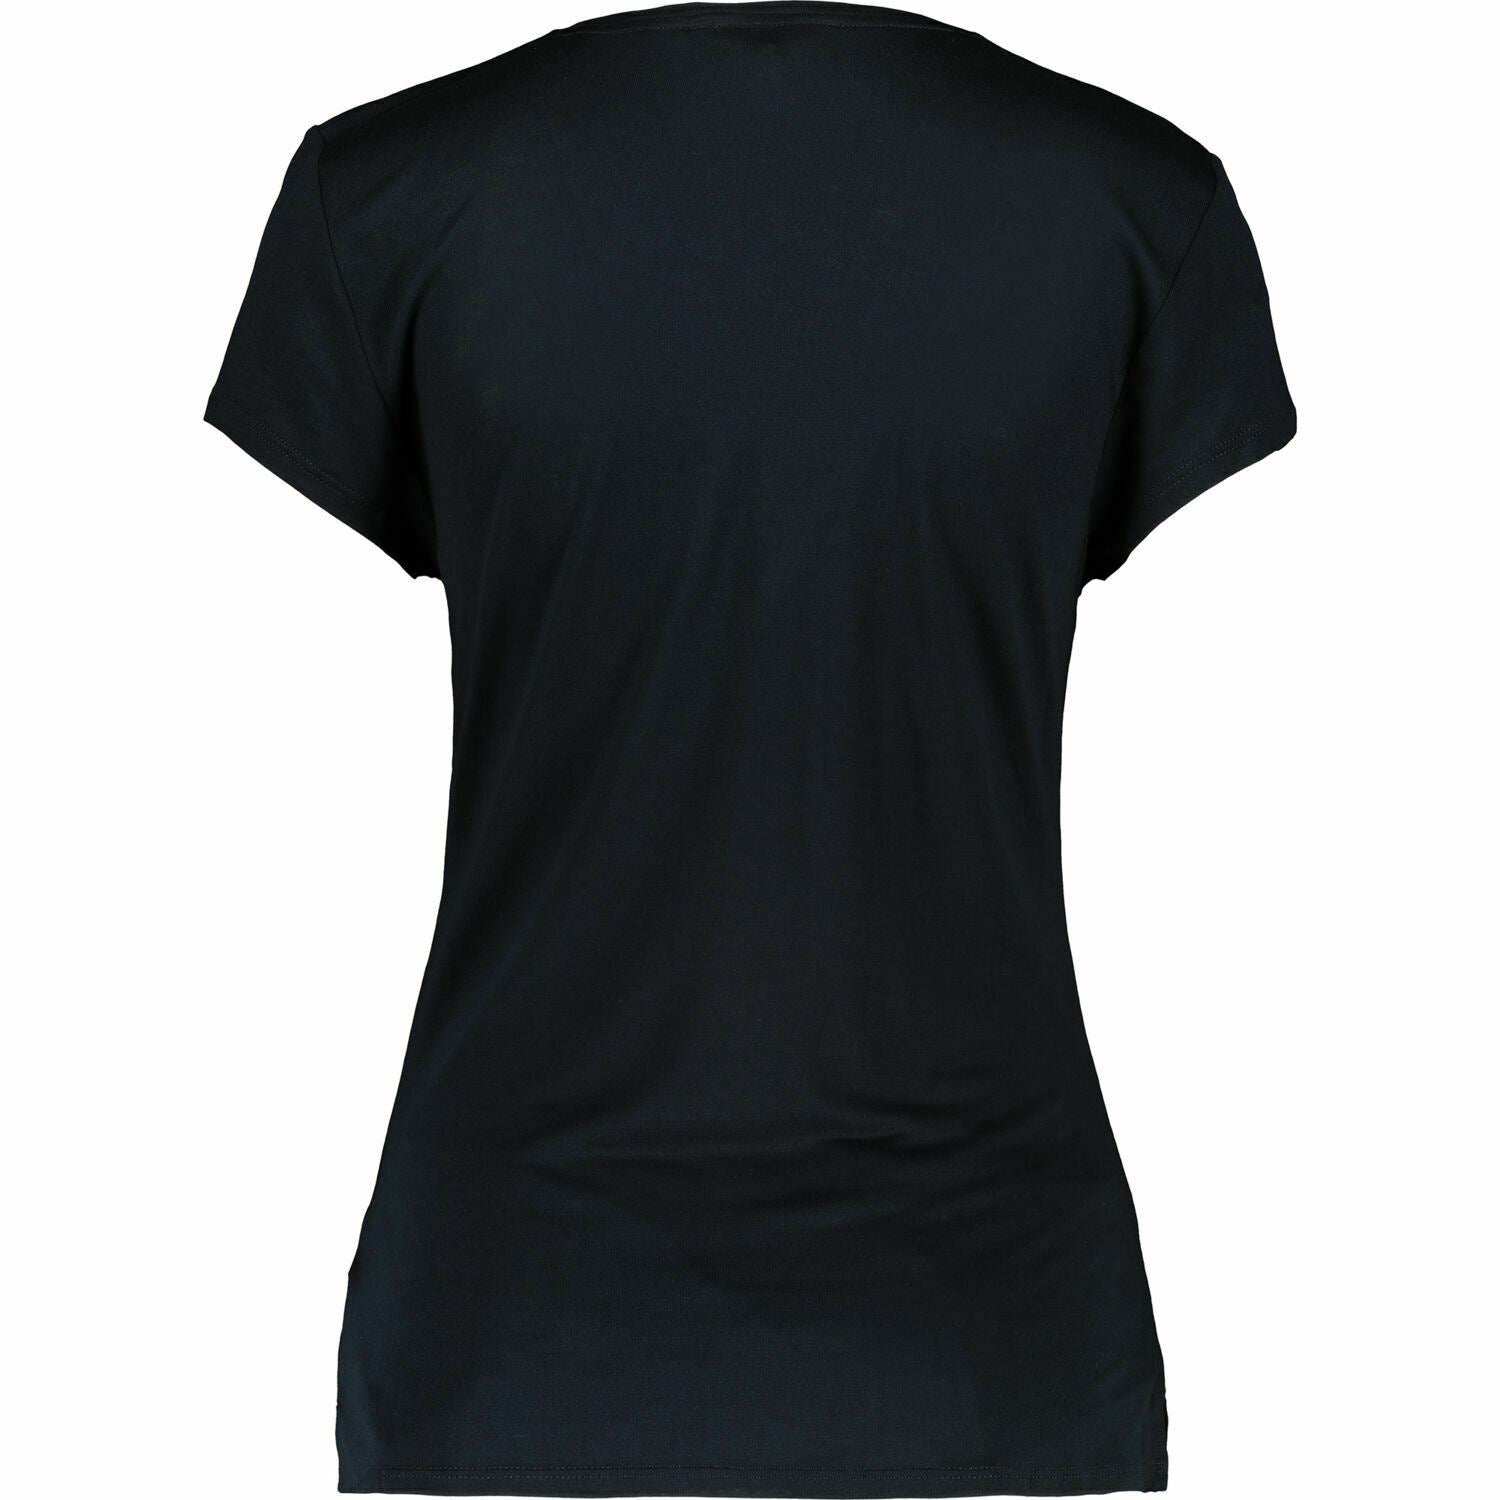 Women's Ted Baker Navy Blue Relax T-Shirt  Ted Baker Size Small T1  RRP Â£49